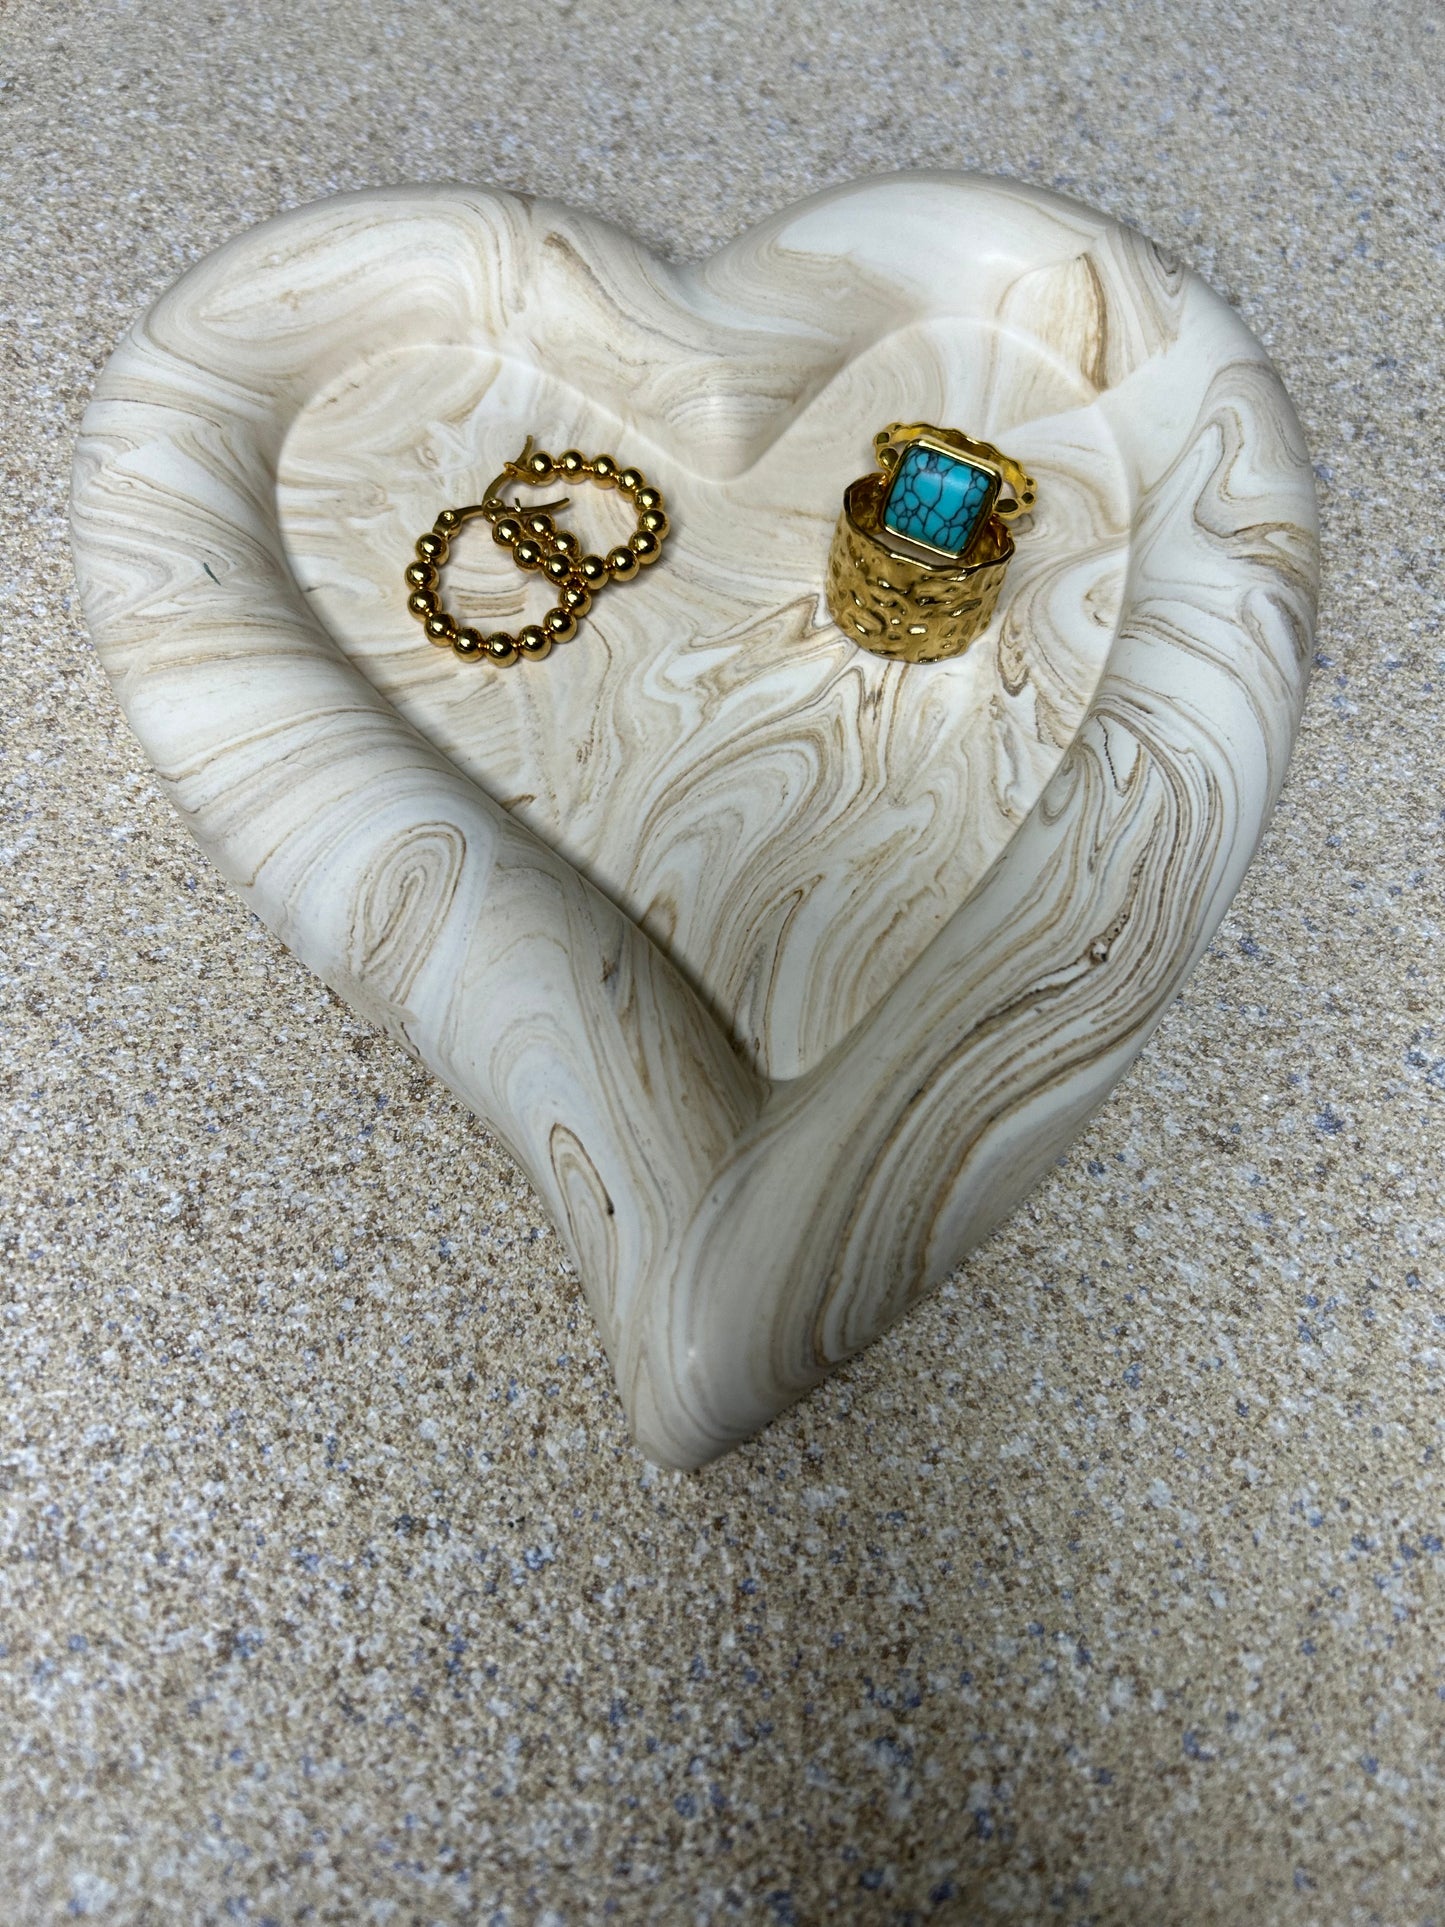 Handmade Home Accessories - A angled shot of a heart shaped trinket tray that is brown marble effect with 2 gold rings on and a pair of gold hoops. based on a natural stone background.